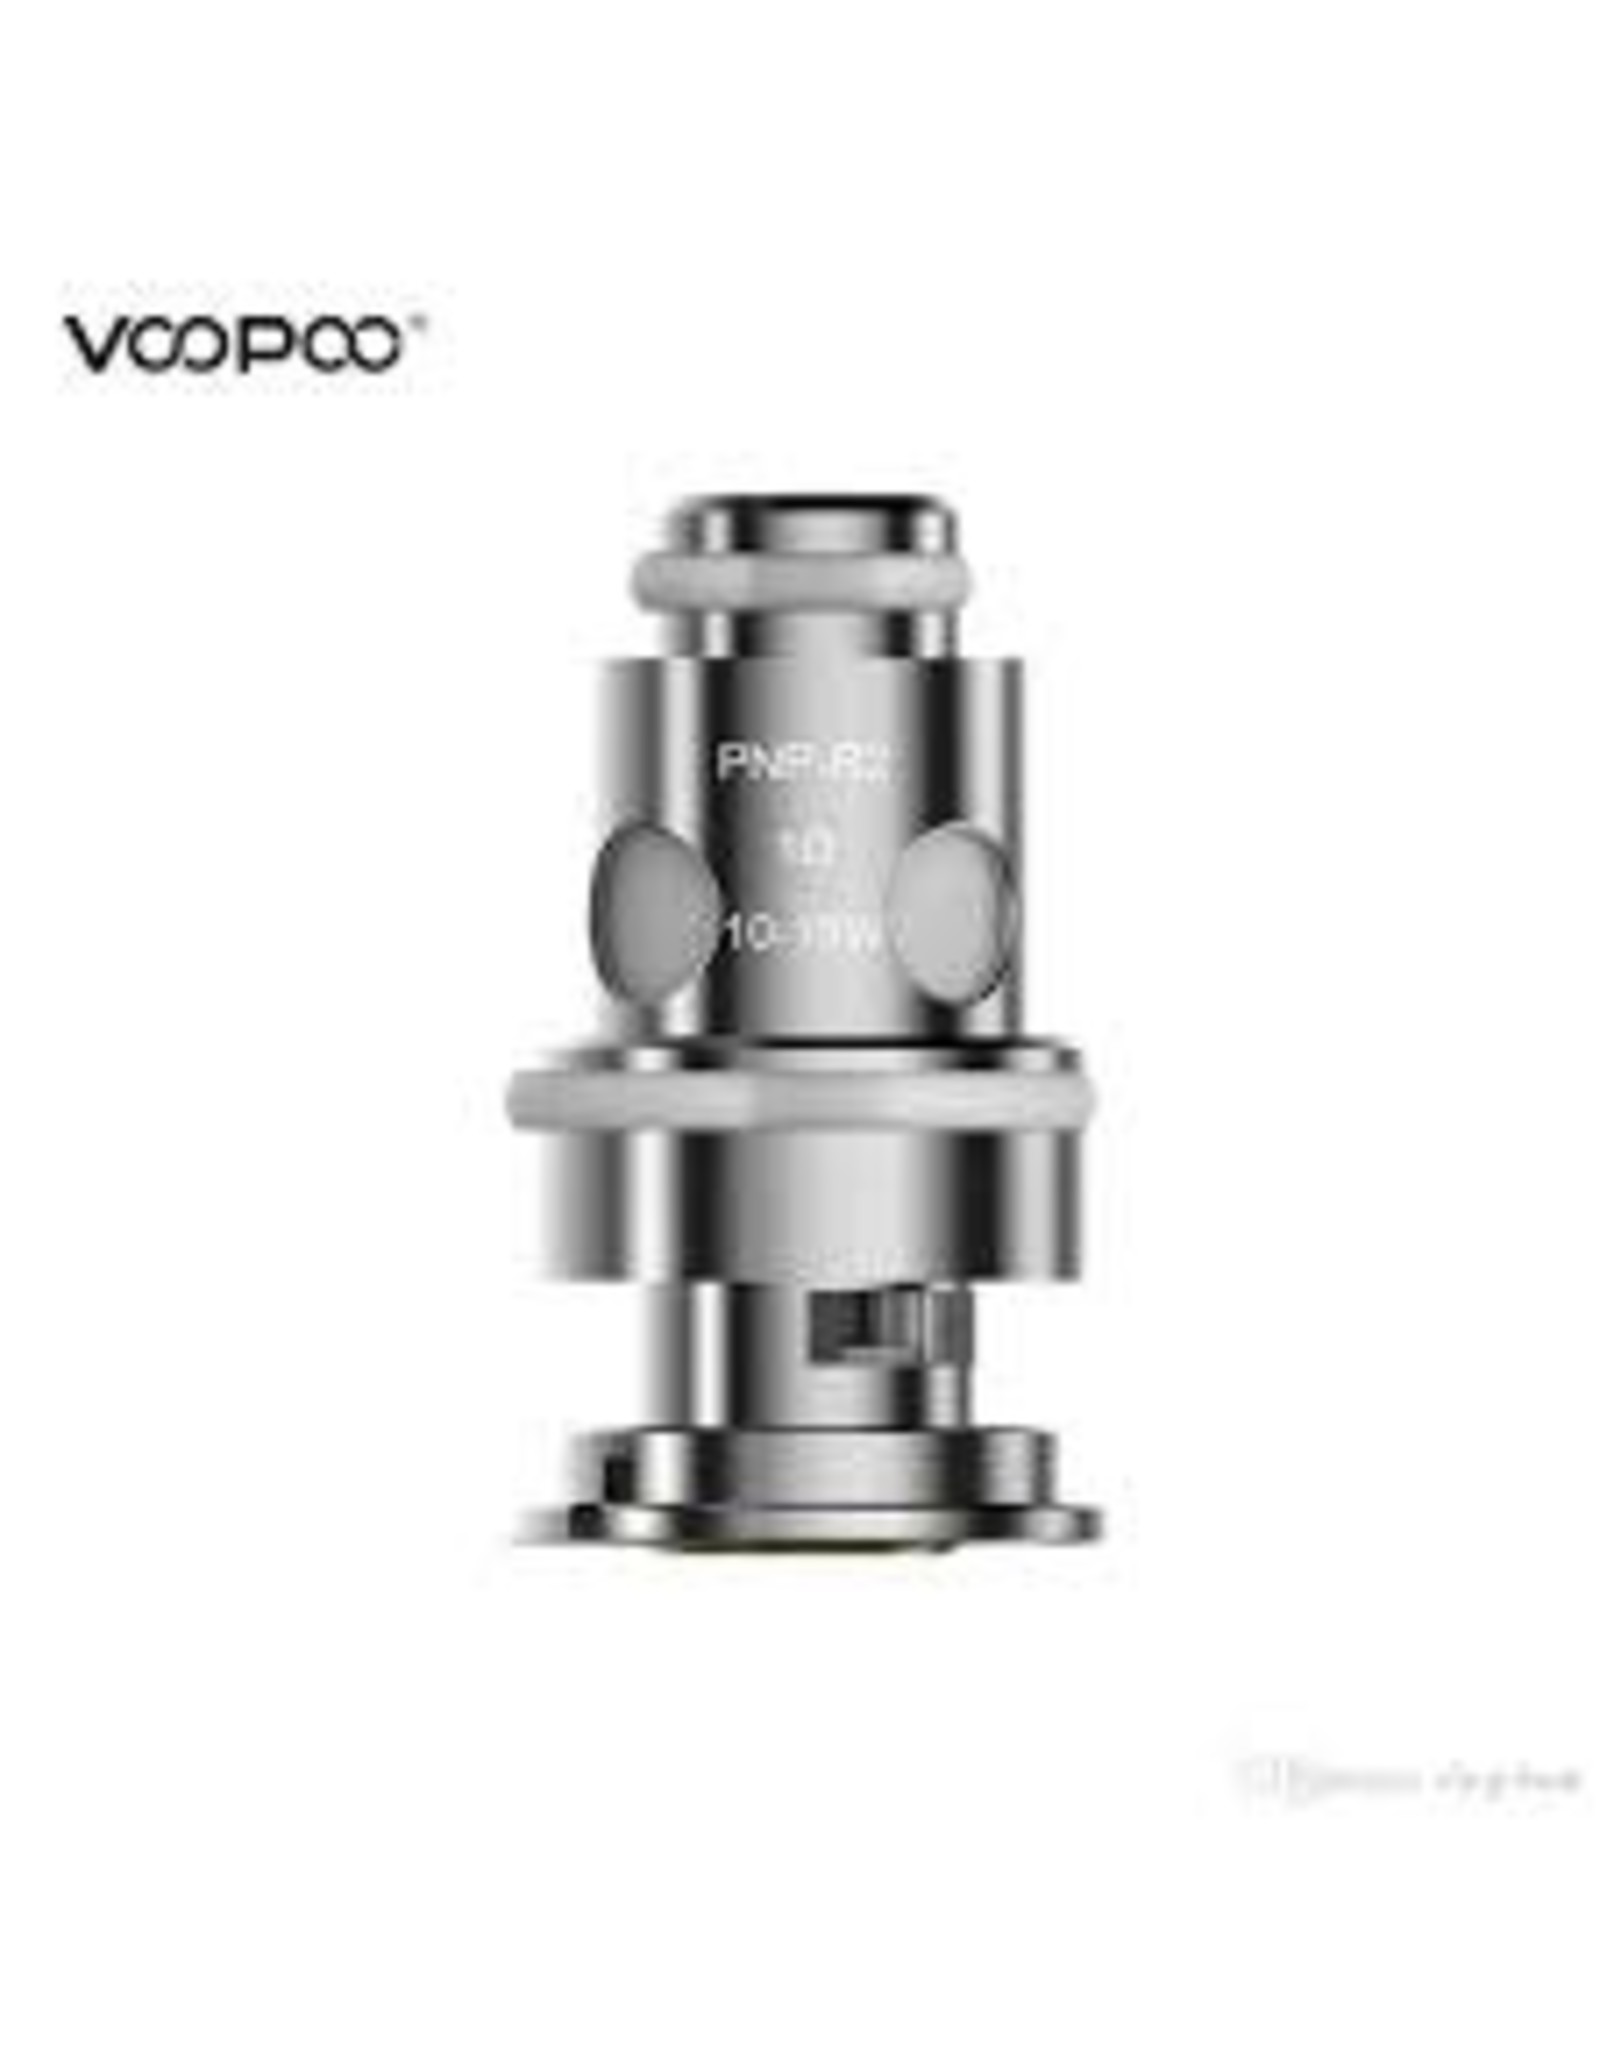 VOOPOO VOOPOO PNP R2 1.0OHM LACEMENT COIL (1pc)